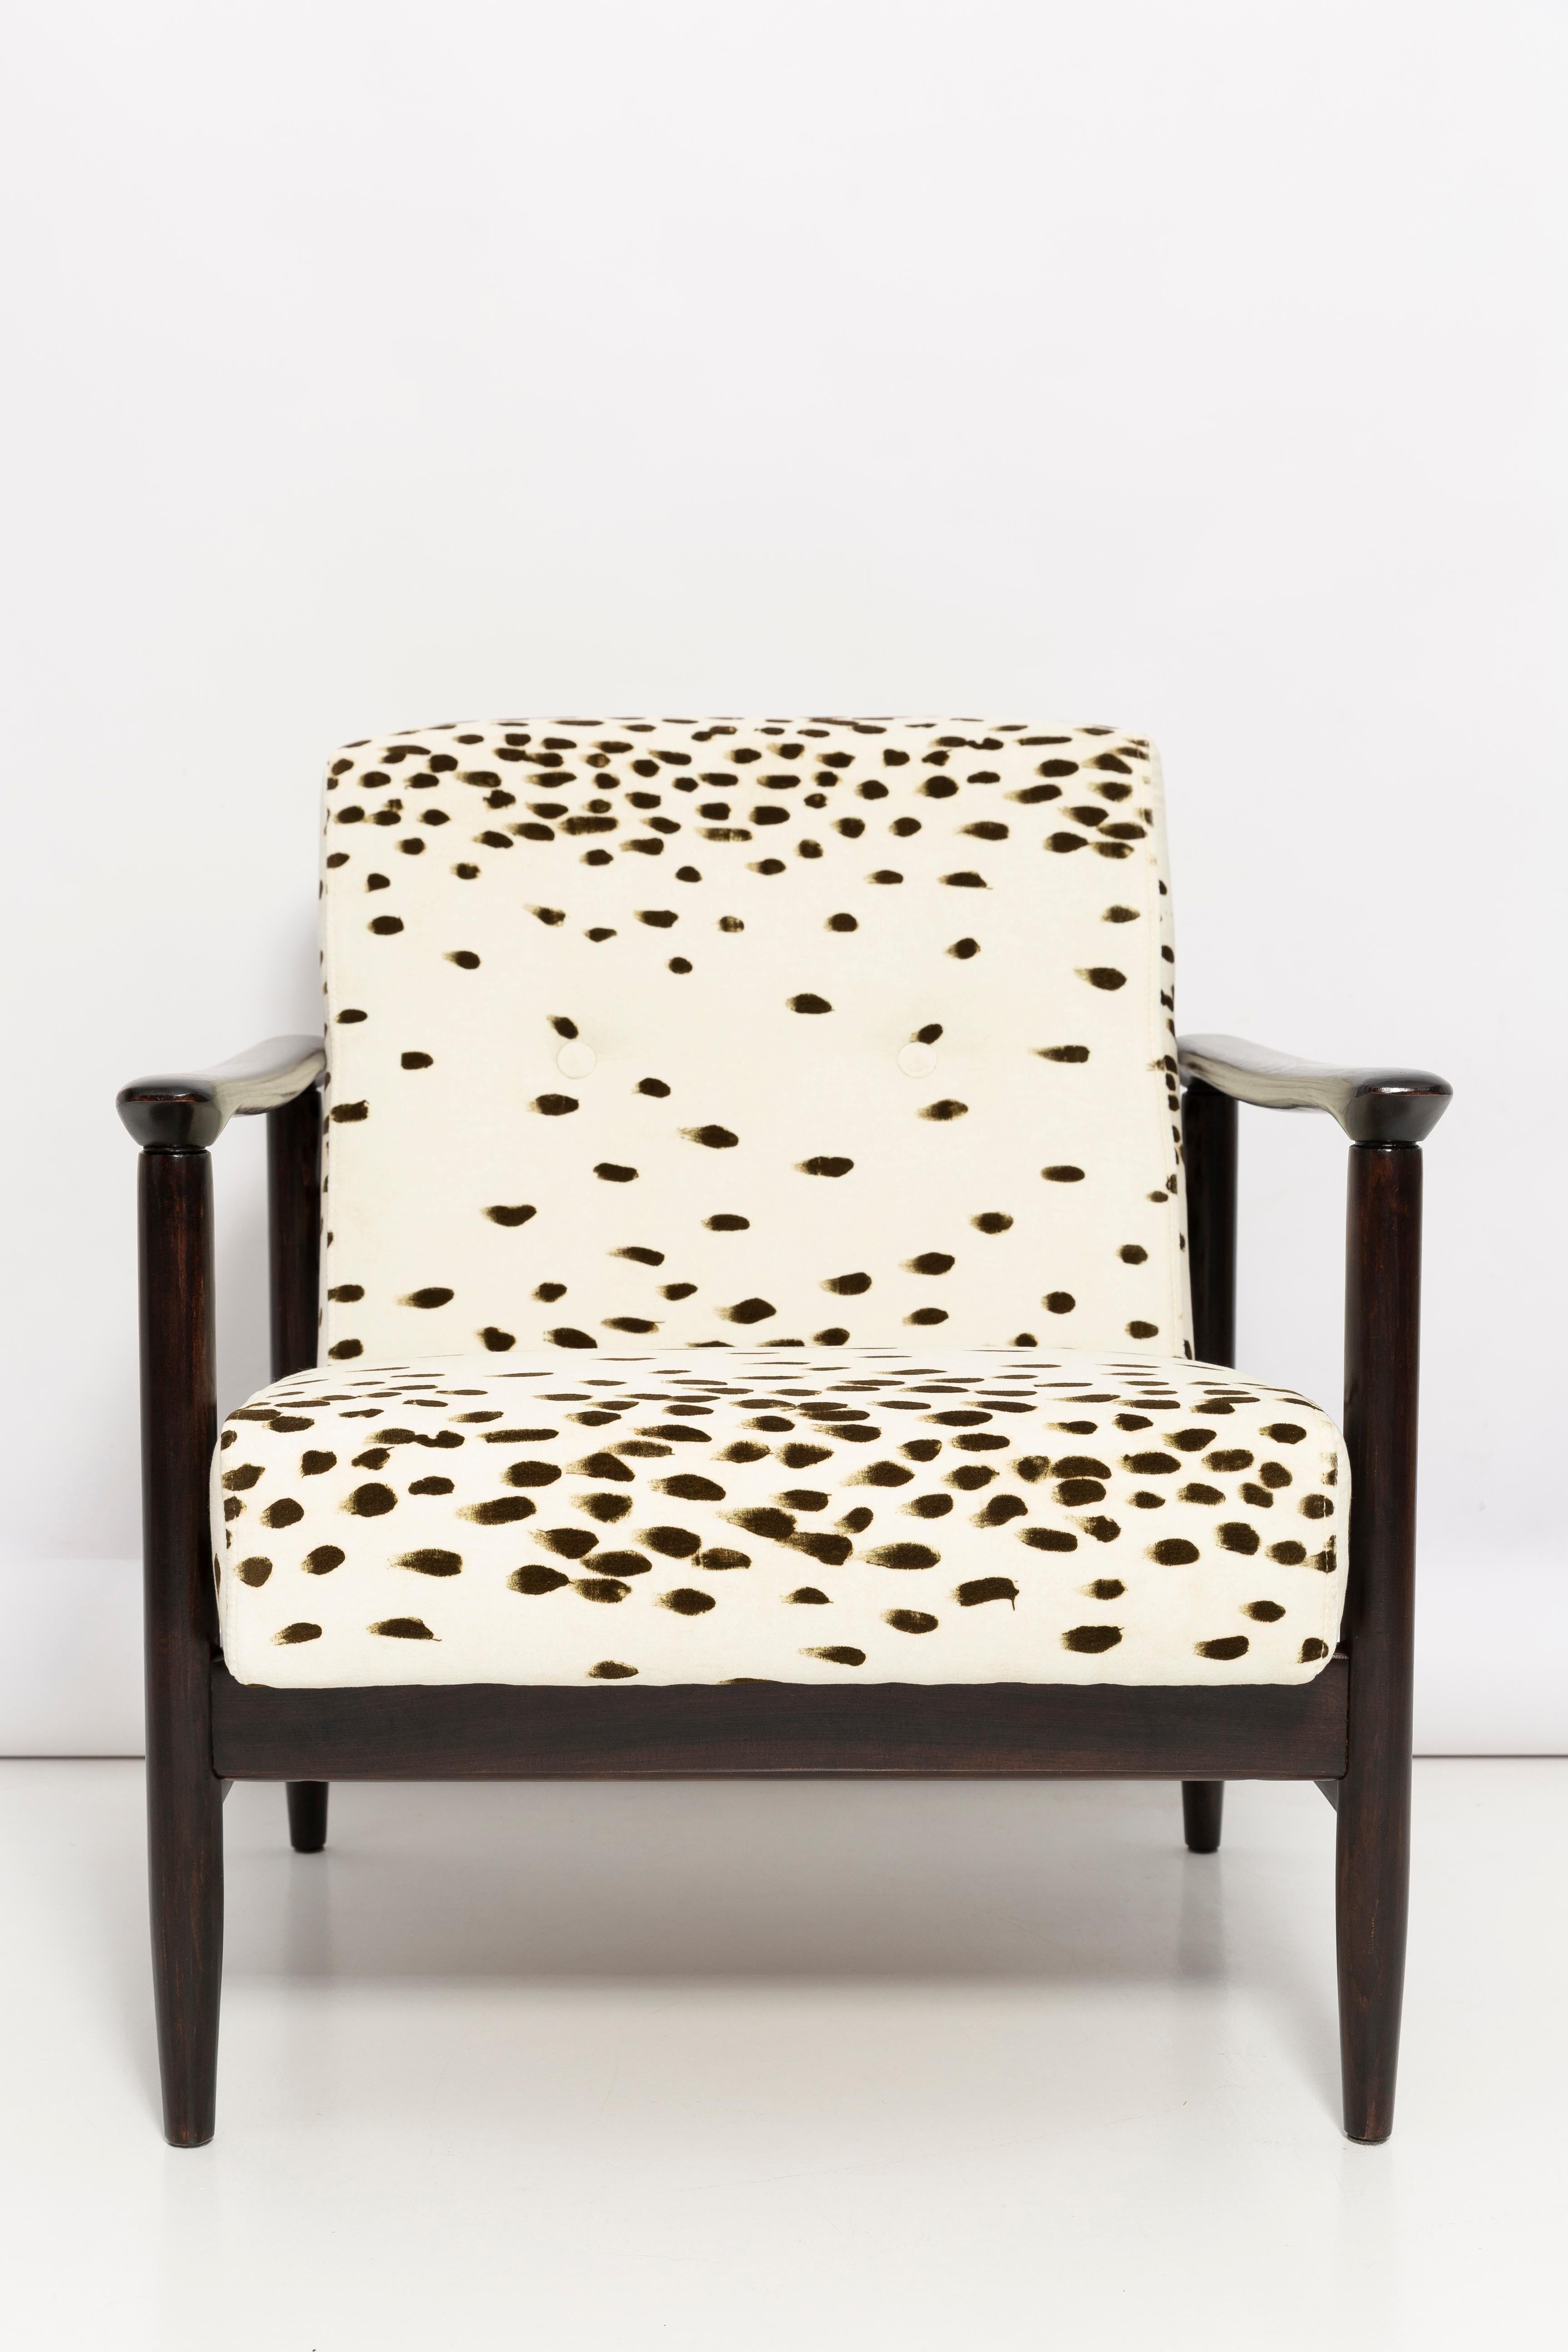 Set of Two Mid Century Dalmatian Velvet Armchairs, by Edmund Homa, Europe, 1960s For Sale 5